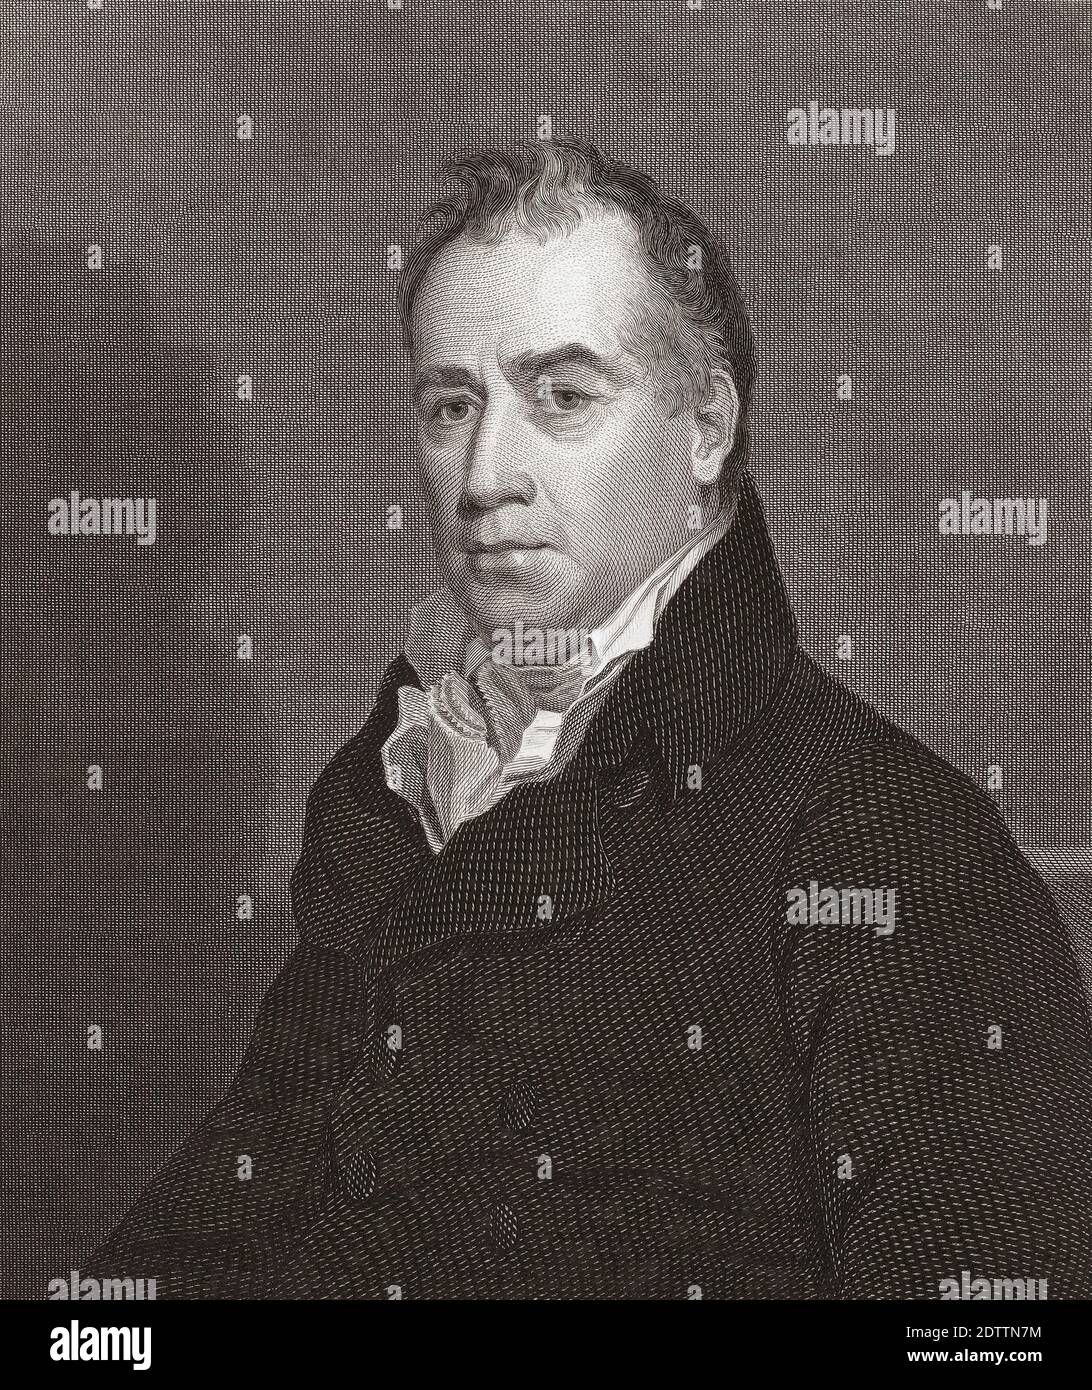 Oliver Wolcott, 1726 - 1797. American statesman and Founding Father.  Governor, State of Connecticut.  After an engraving by Asher Brown Durand from a work by Thomas Sully. Stock Photo